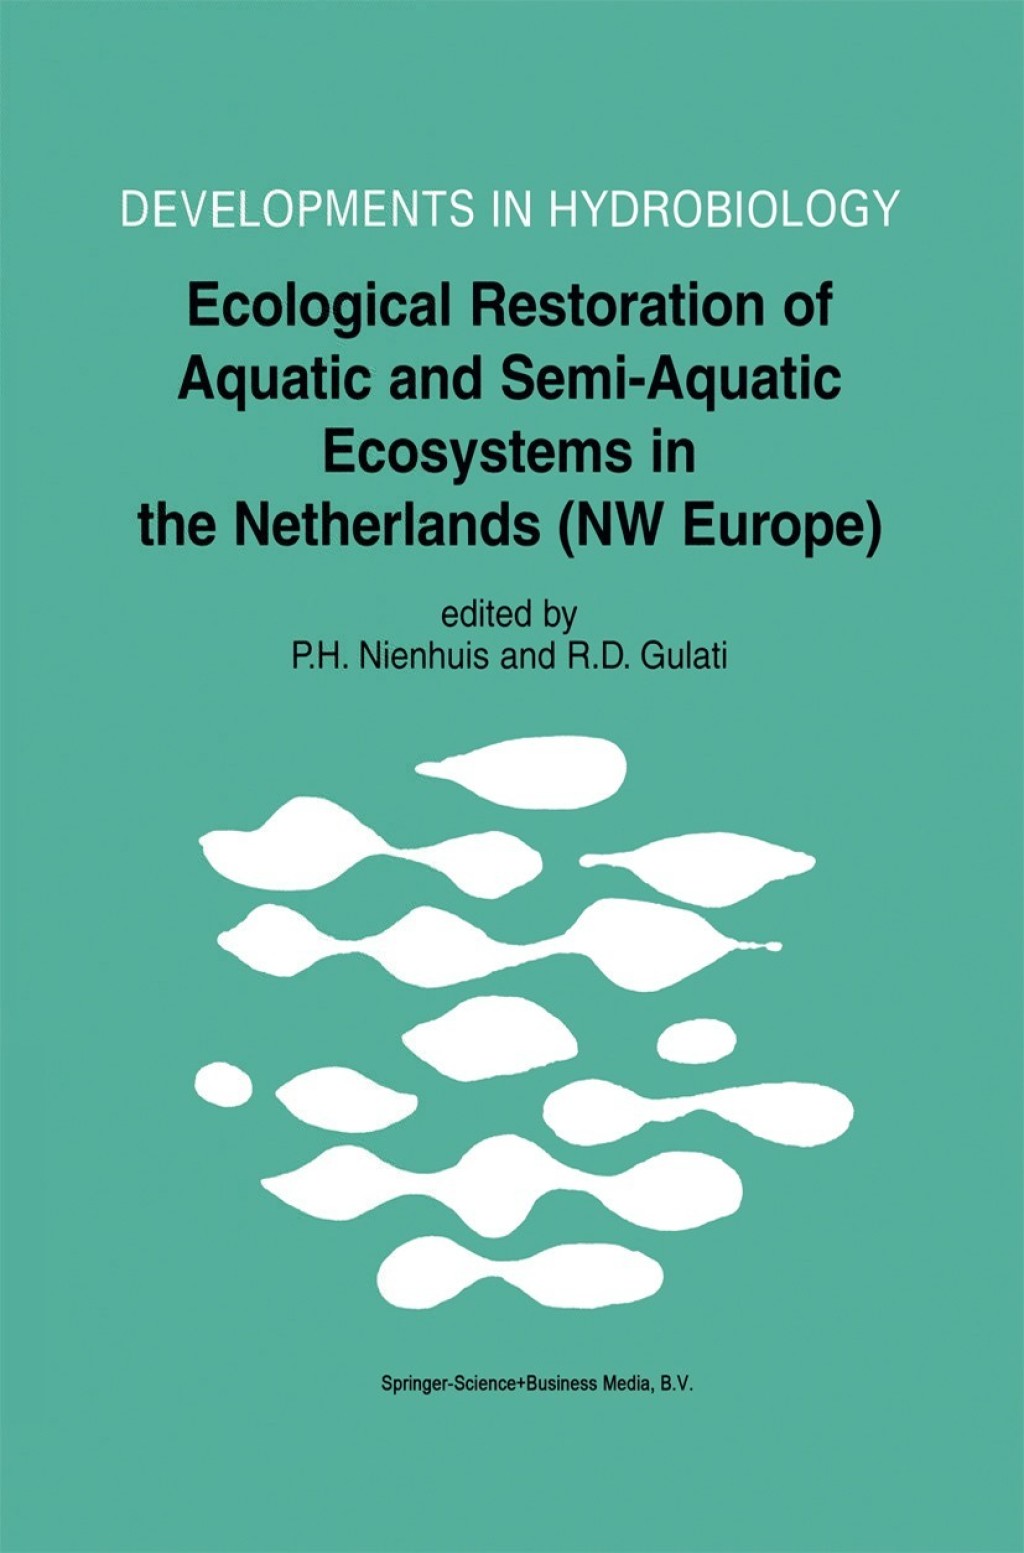 Ecological Restoration of Aquatic and Semi-Aquatic Ecosystems in the Netherlands (NW Europe) - 1st Edition (eBook Rental)